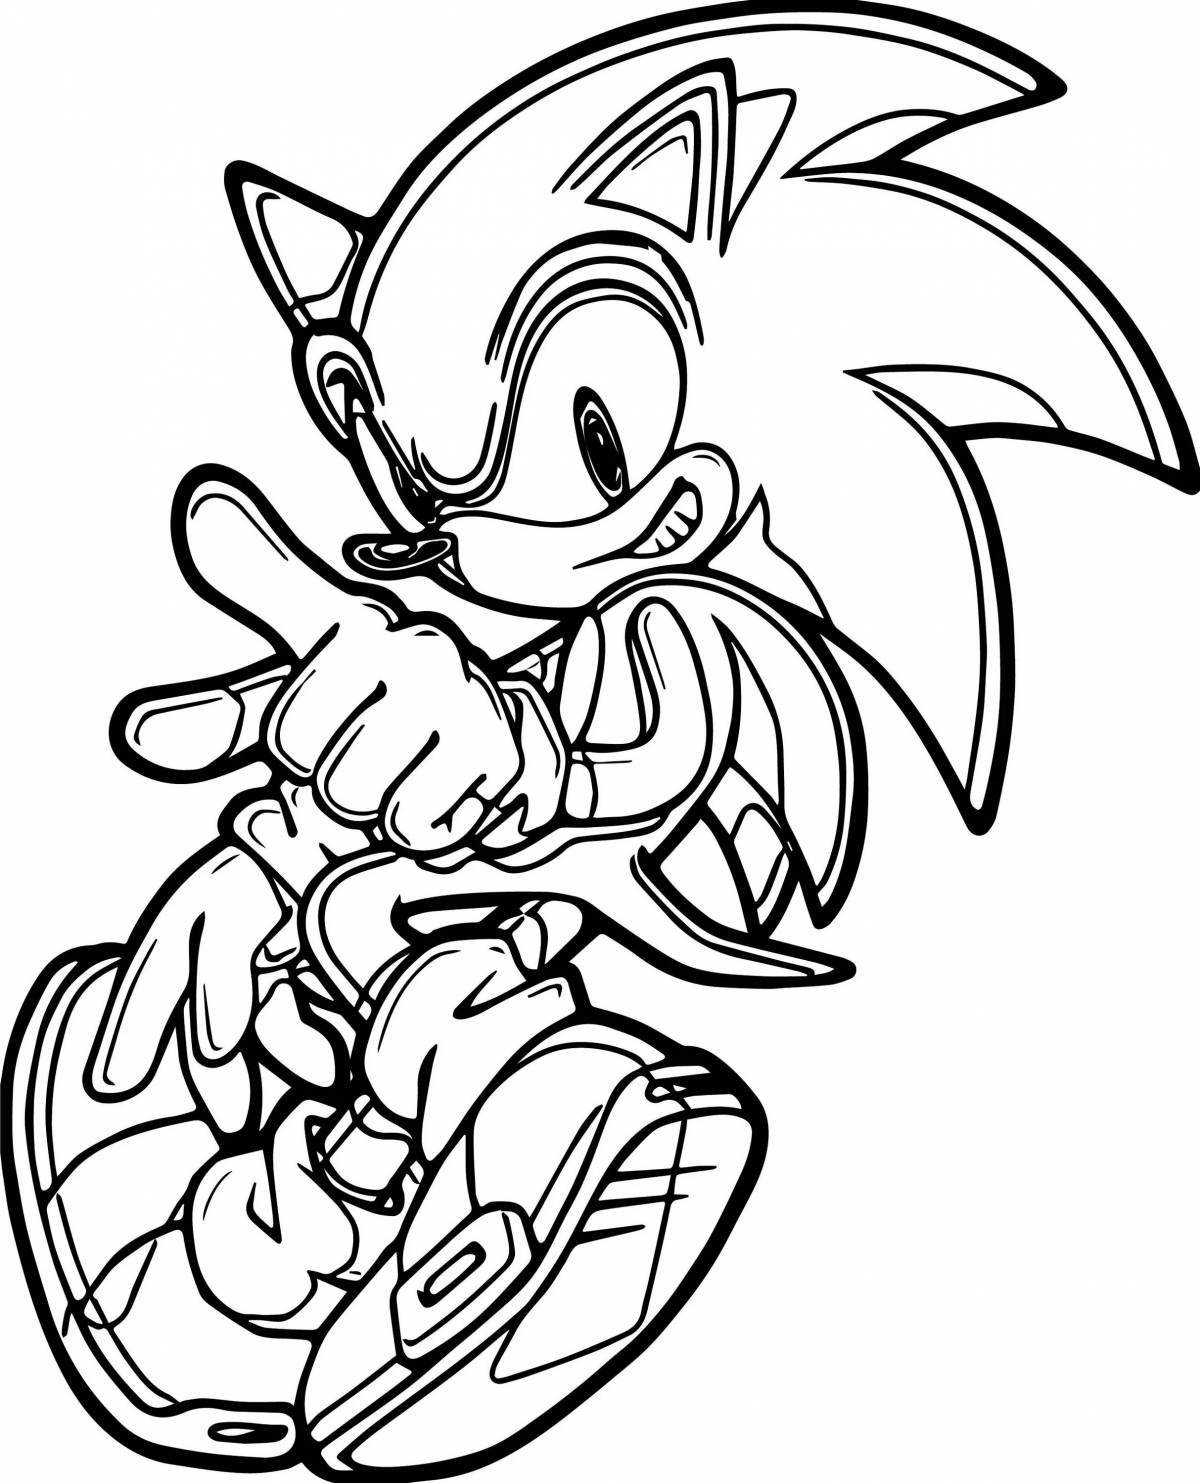 Great sonic coloring book for kids 5-6 years old